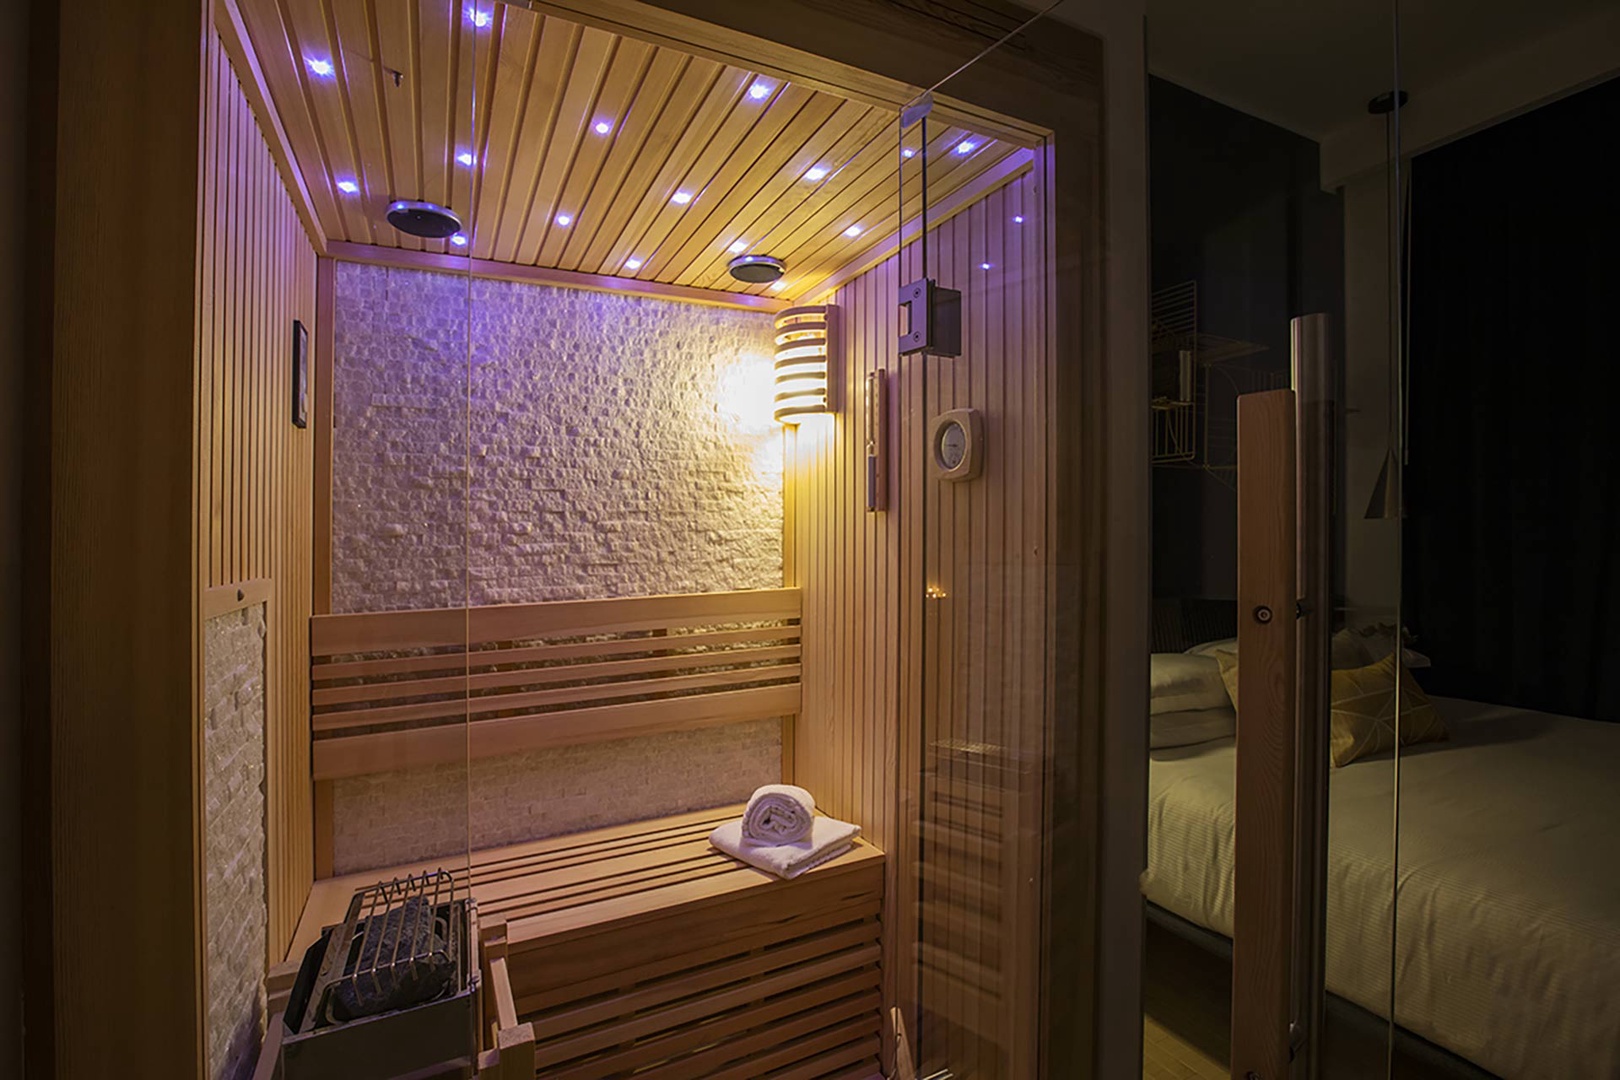 Imagine the relaxation in your personal sauna and jacuzzi.